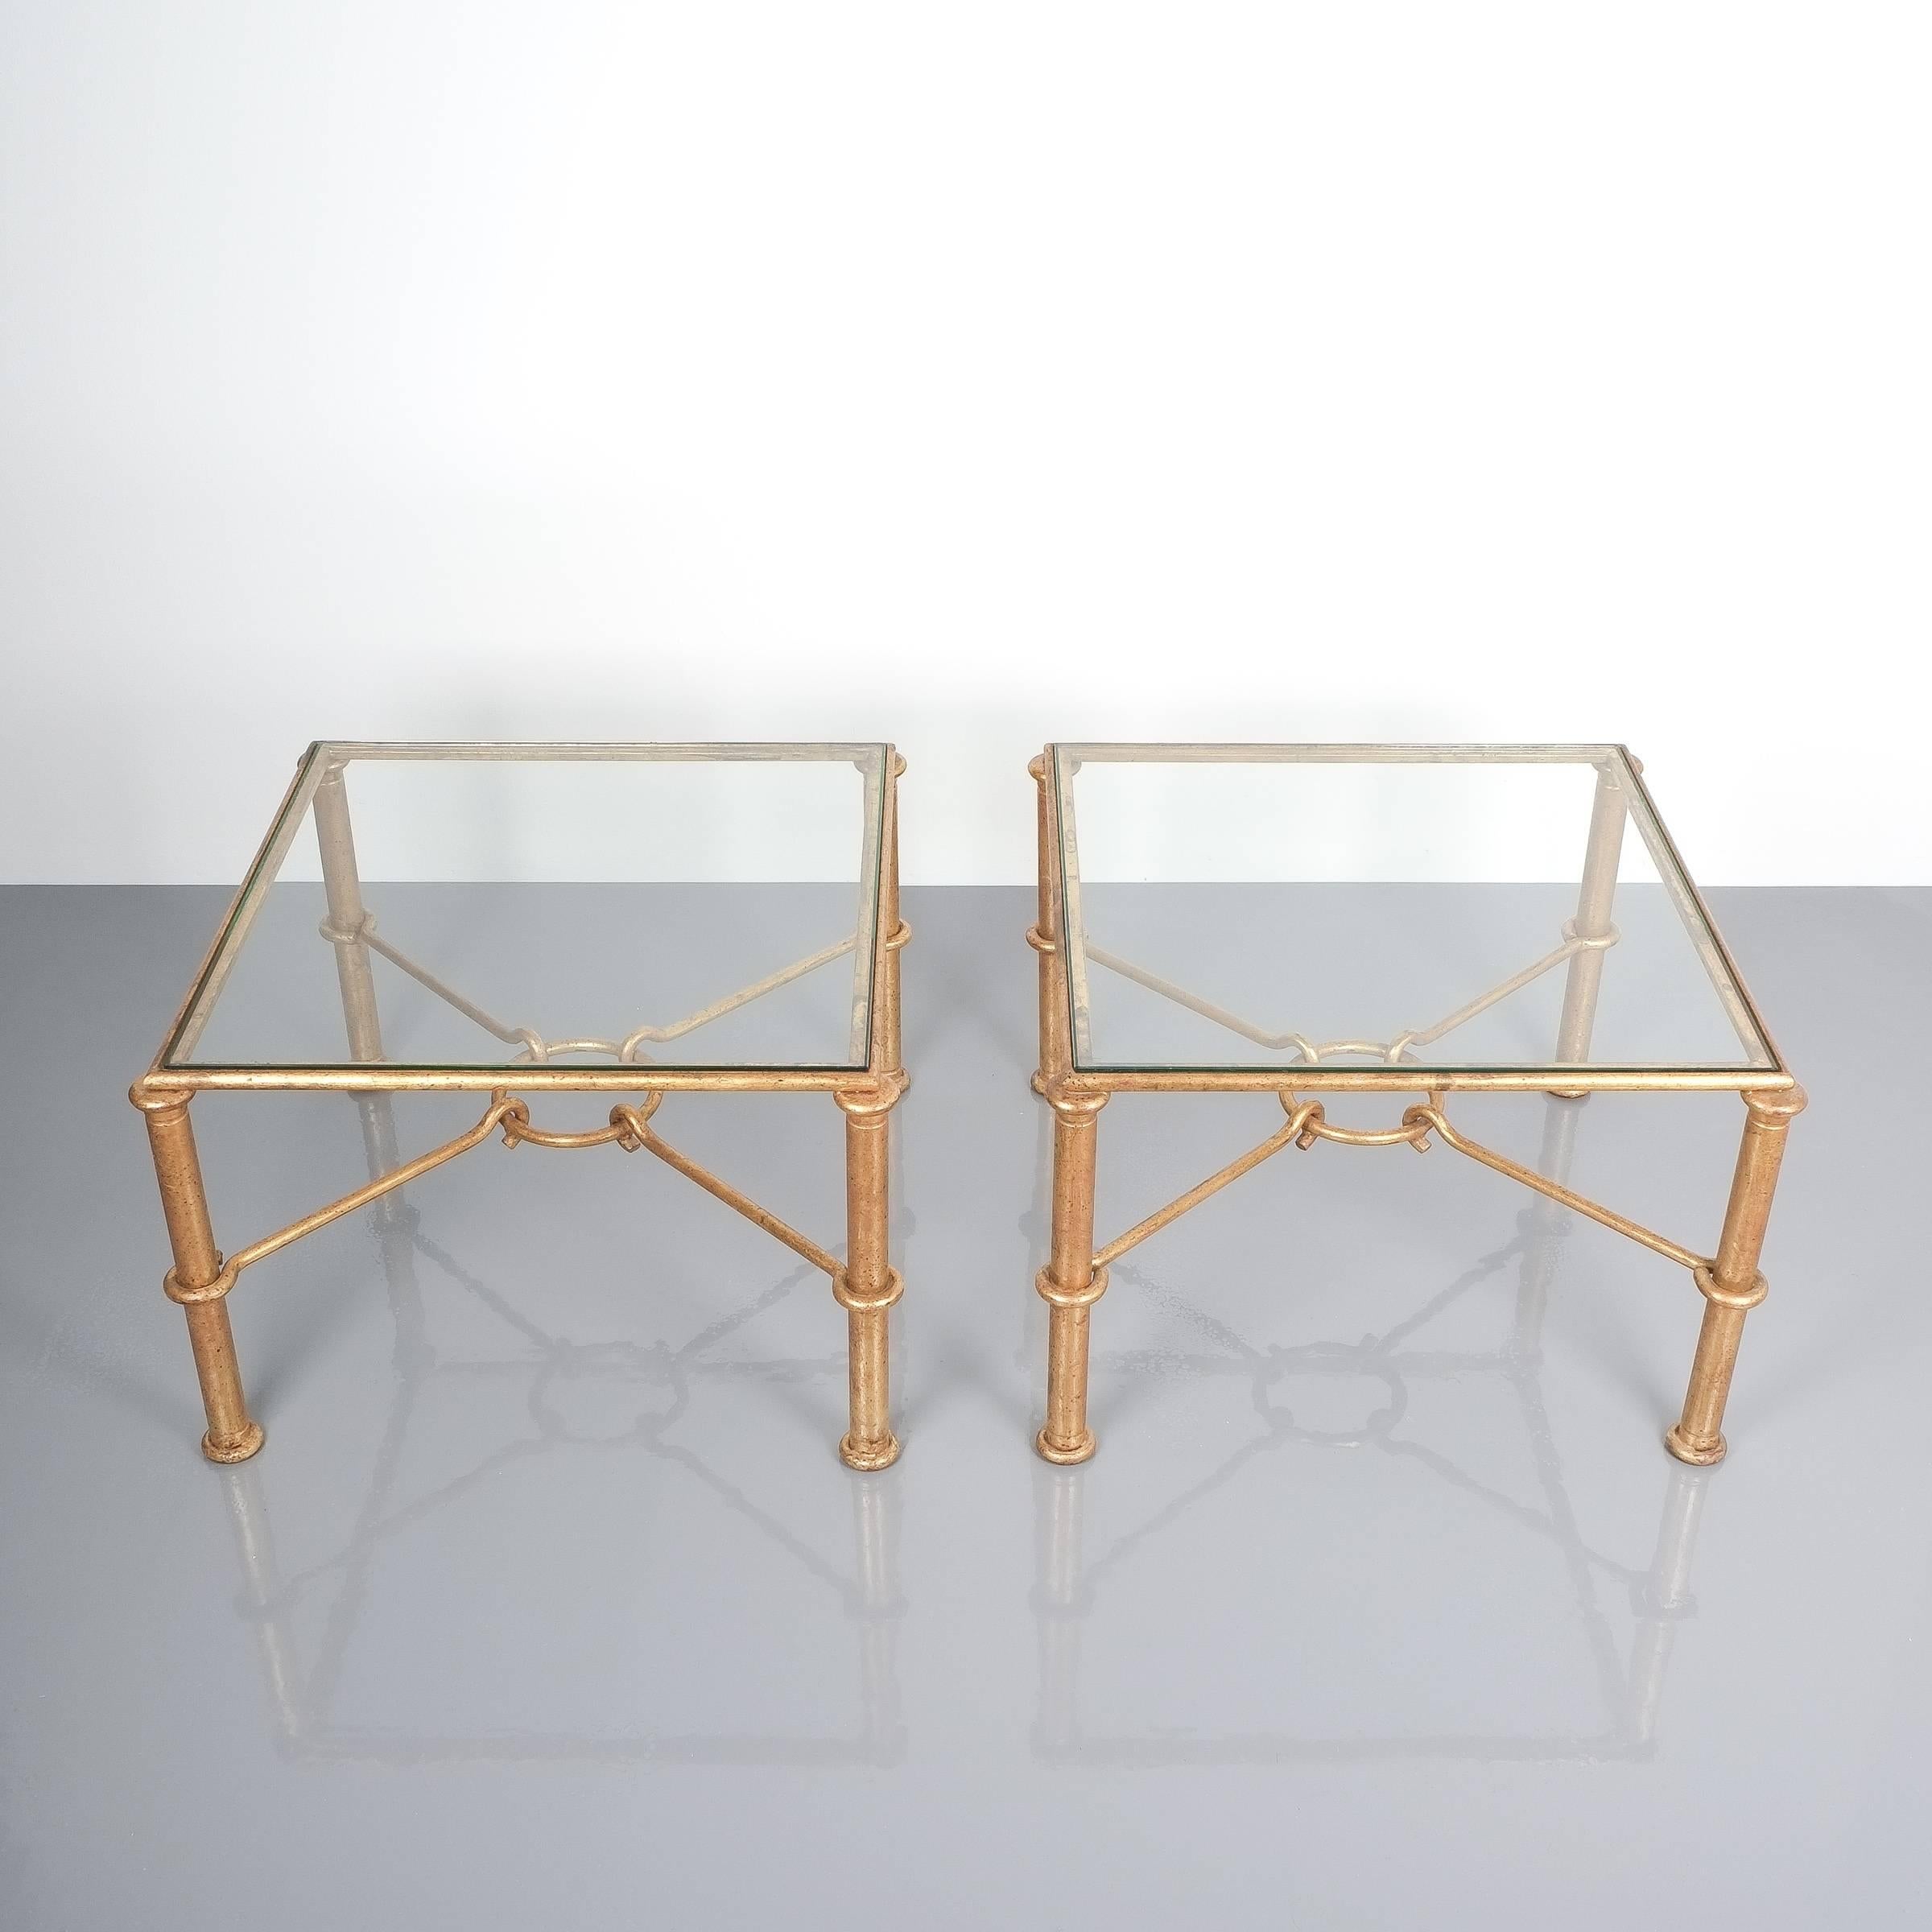 Rene Drouet attributed pair of gilt iron side tables, France, 1950. Pair of 24.8